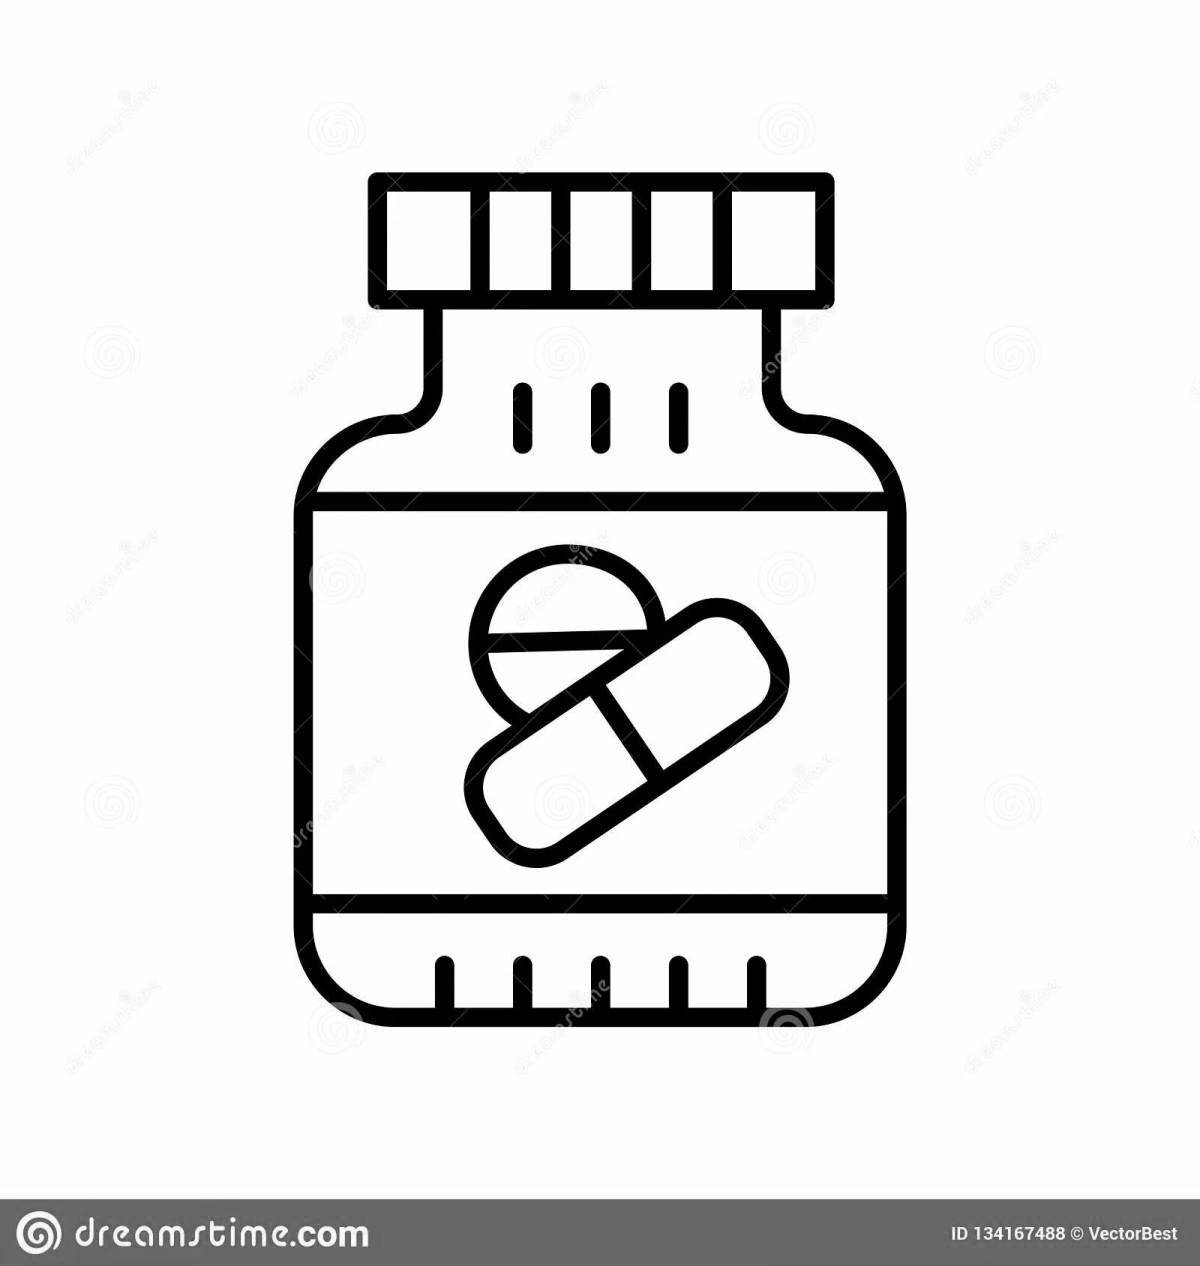 Imaginary drugs coloring page